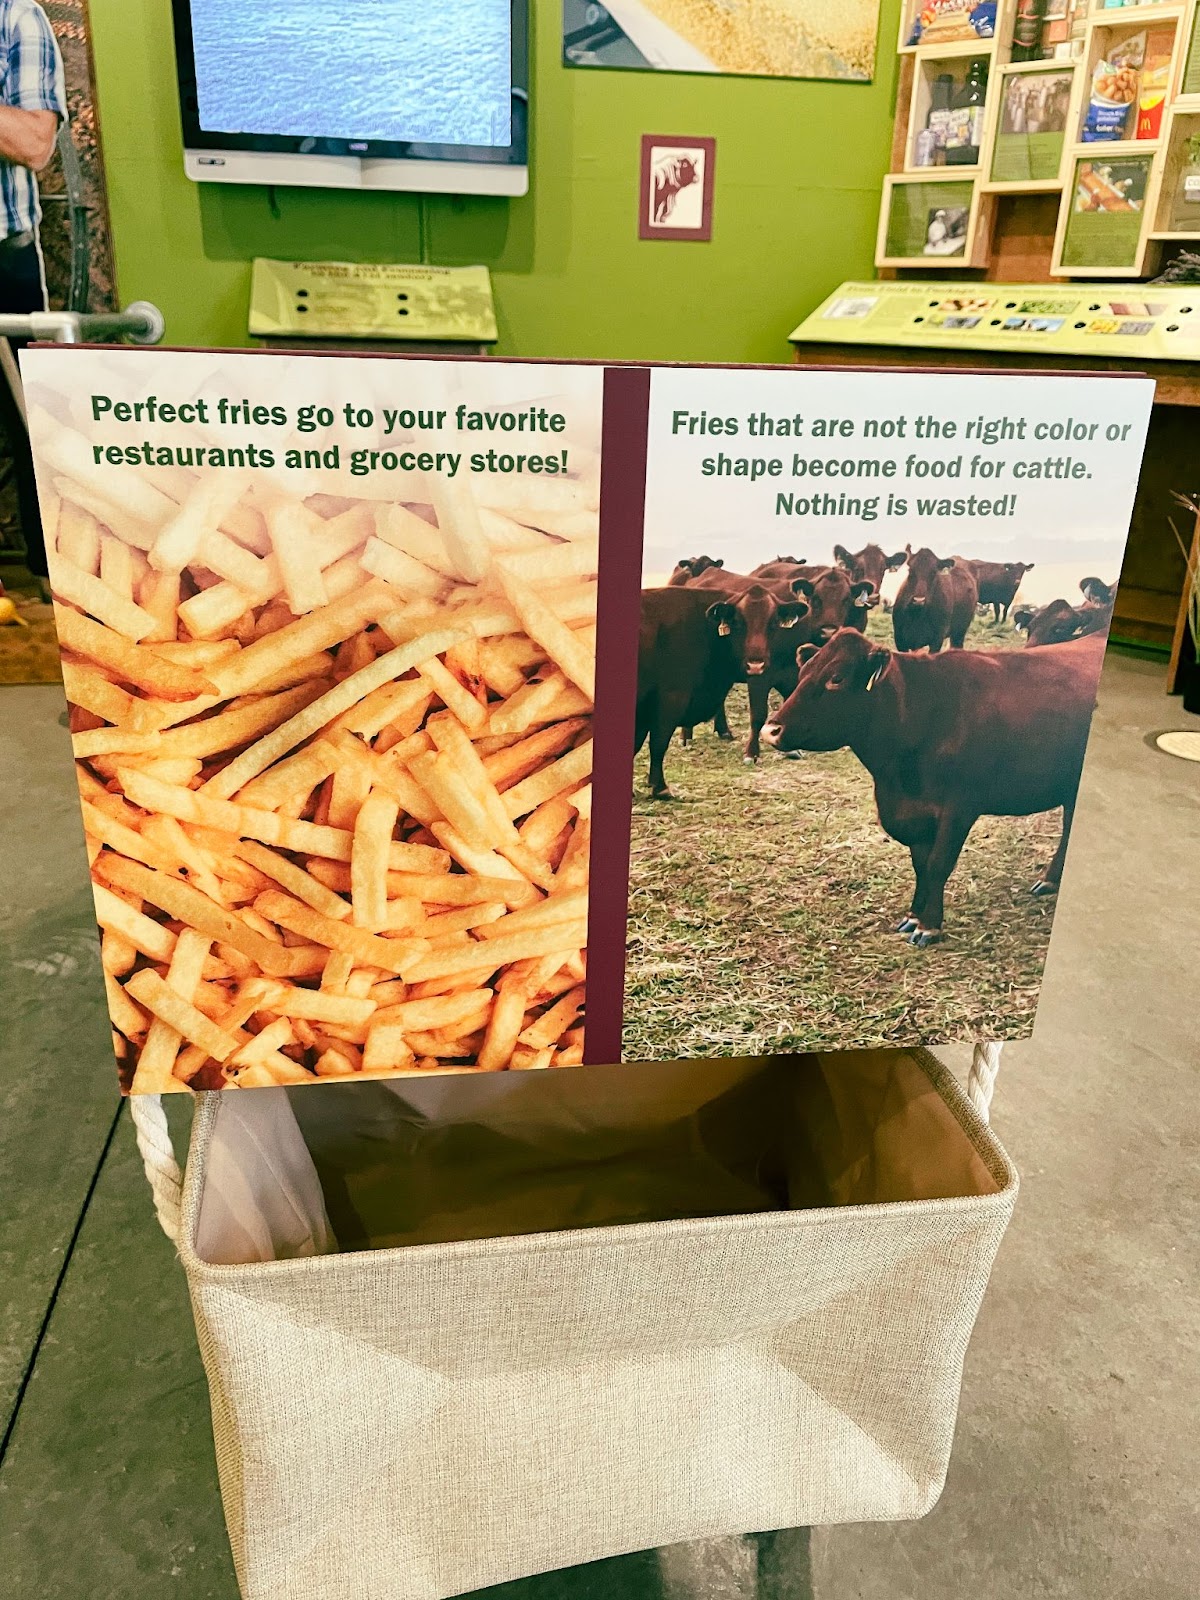 washington state potatoes are never wasted! examples of no waste